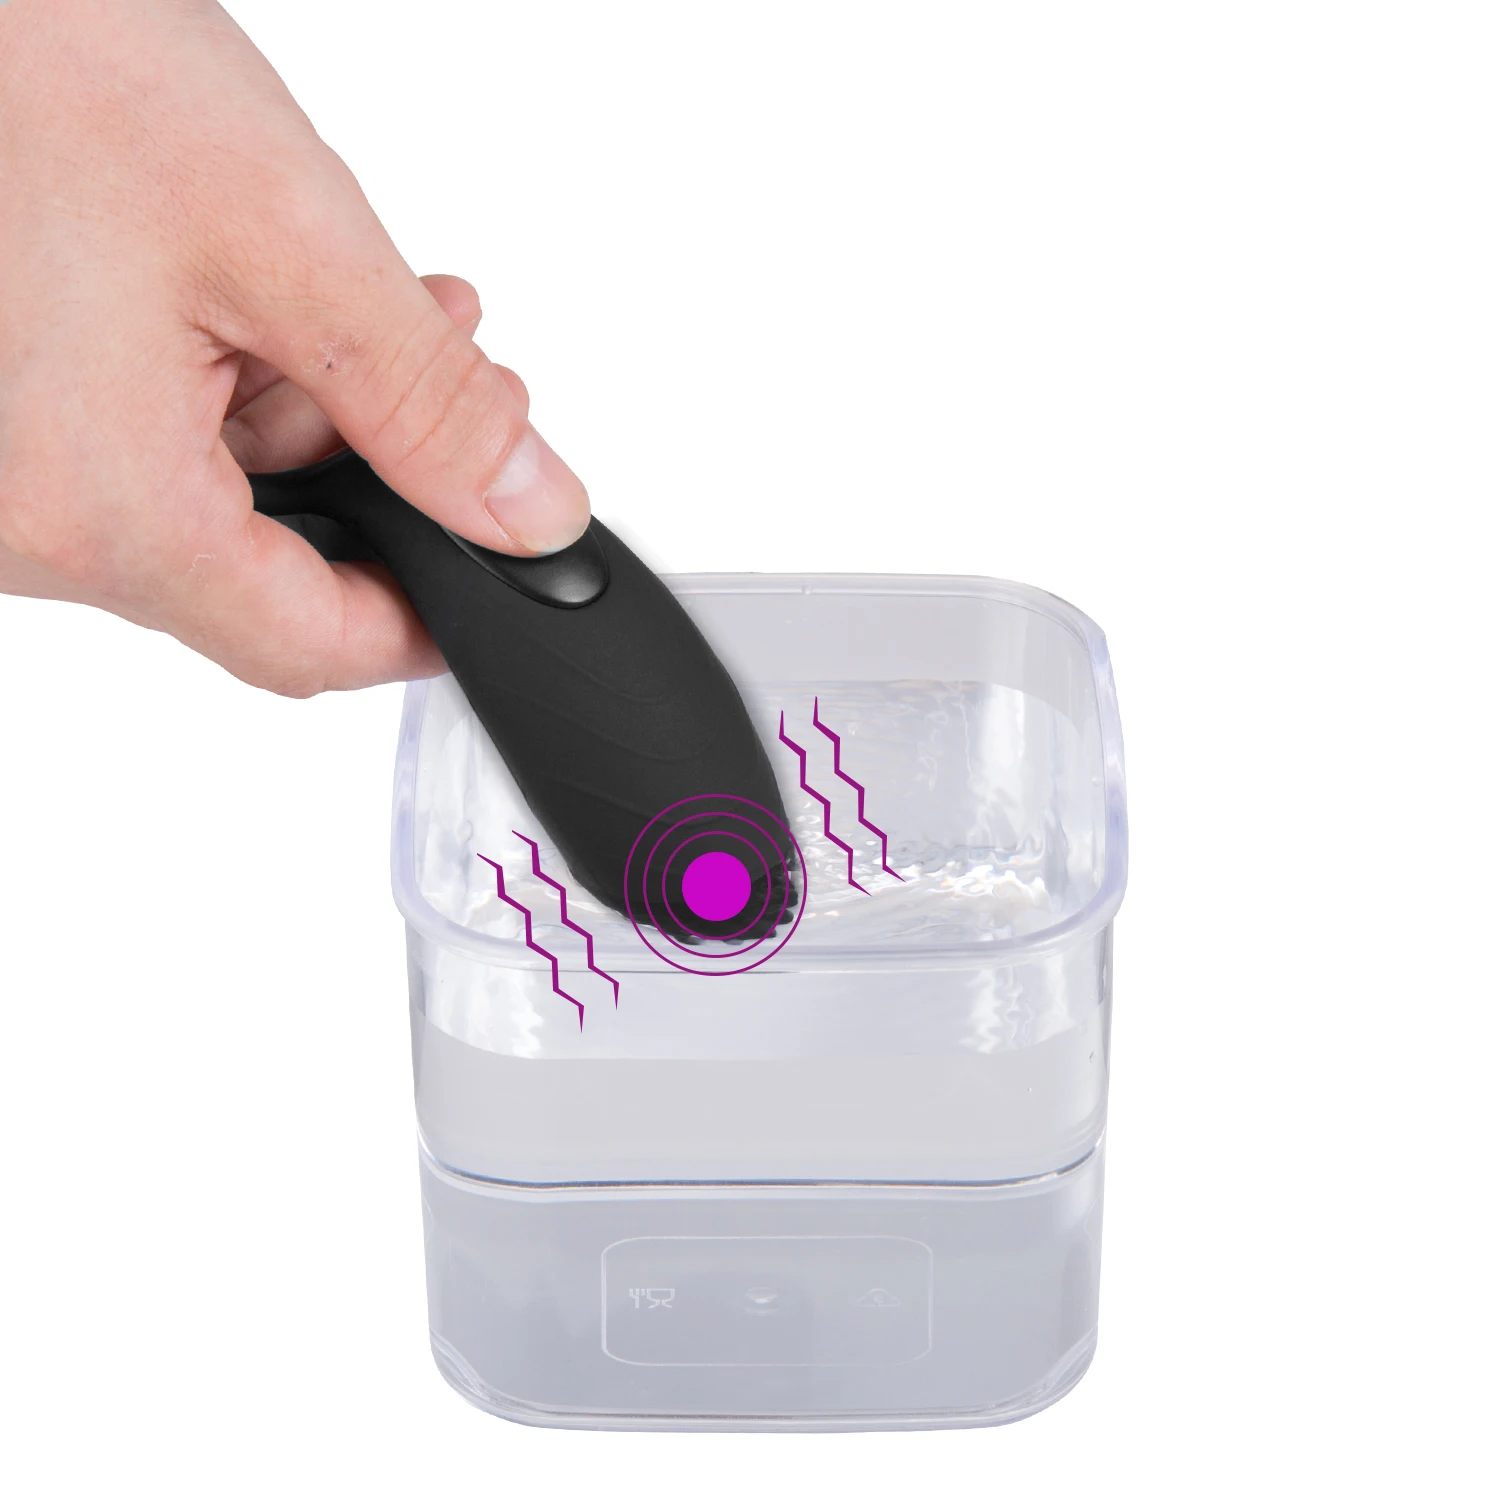 Rechargeable Silicone Vibrator For Cockpenis Ring Vibrator For Male 